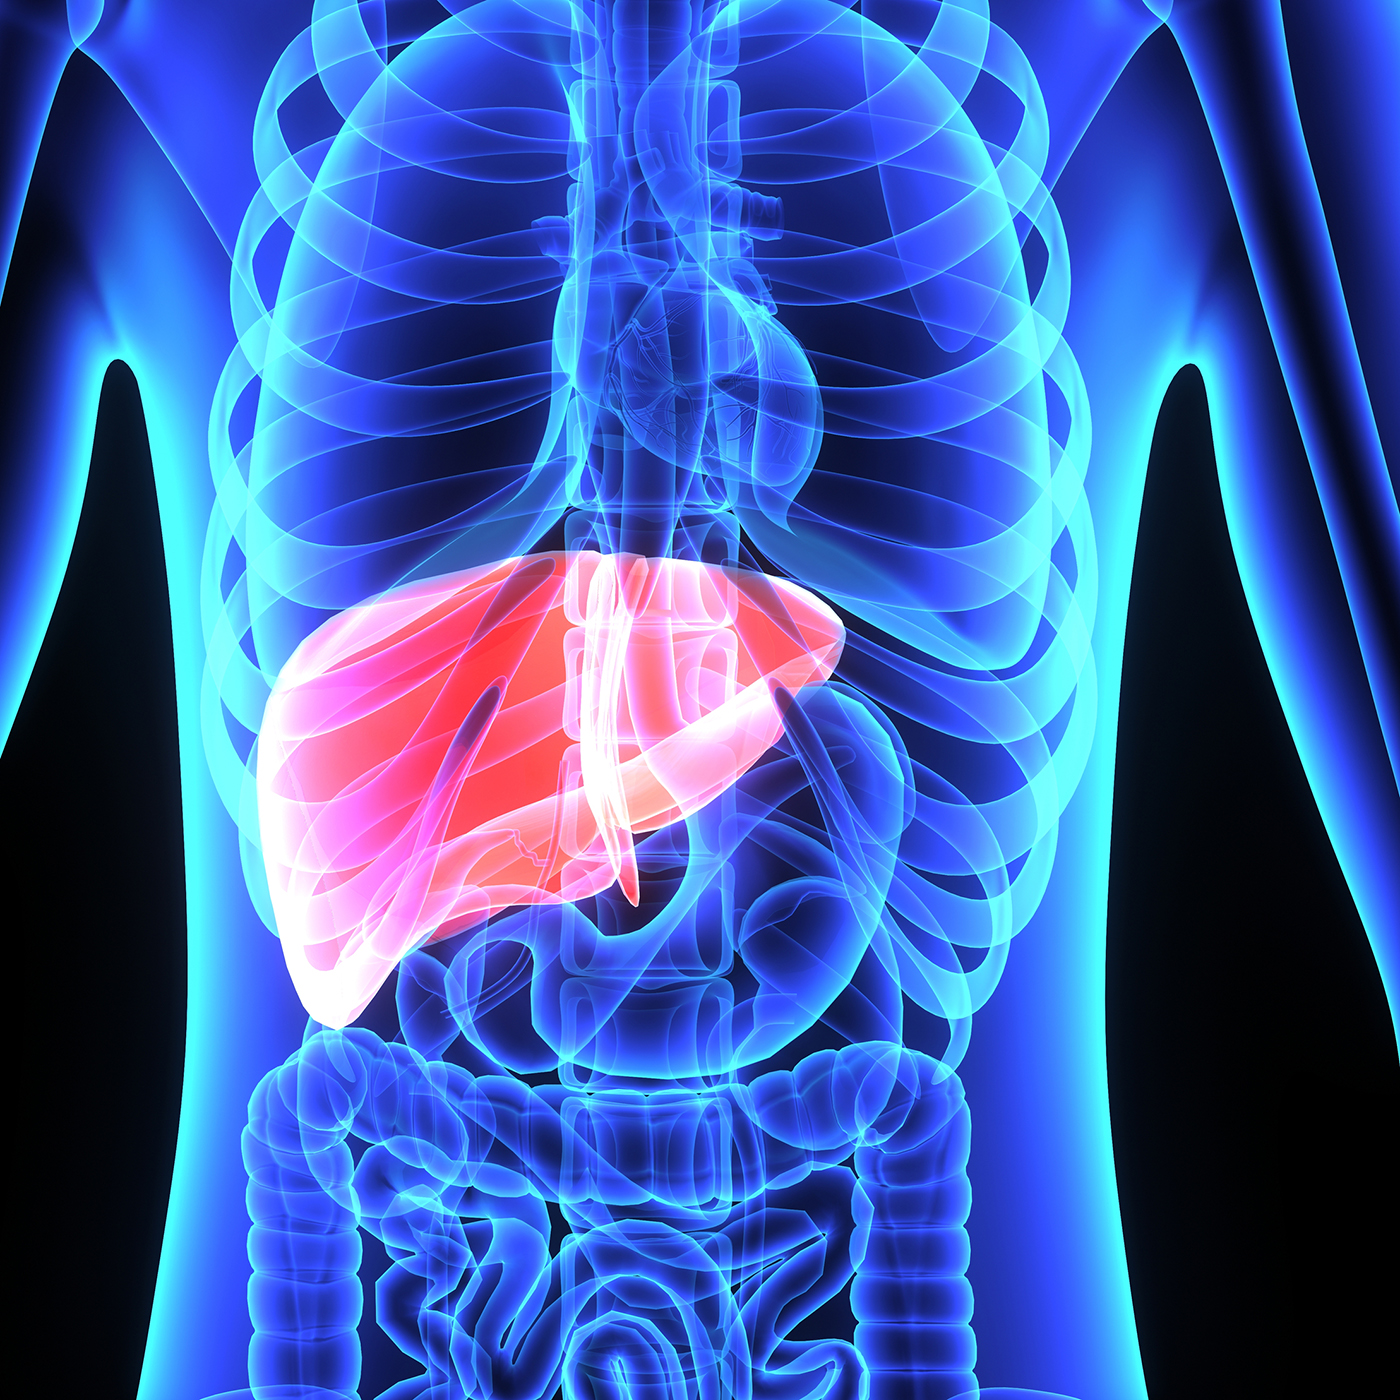 The liver is a vital organ of the digestive system present in vertebrates and some other animals. It has a wide range of functions, including detoxification, protein synthesis, and production of biochemicals necessary for digestion.